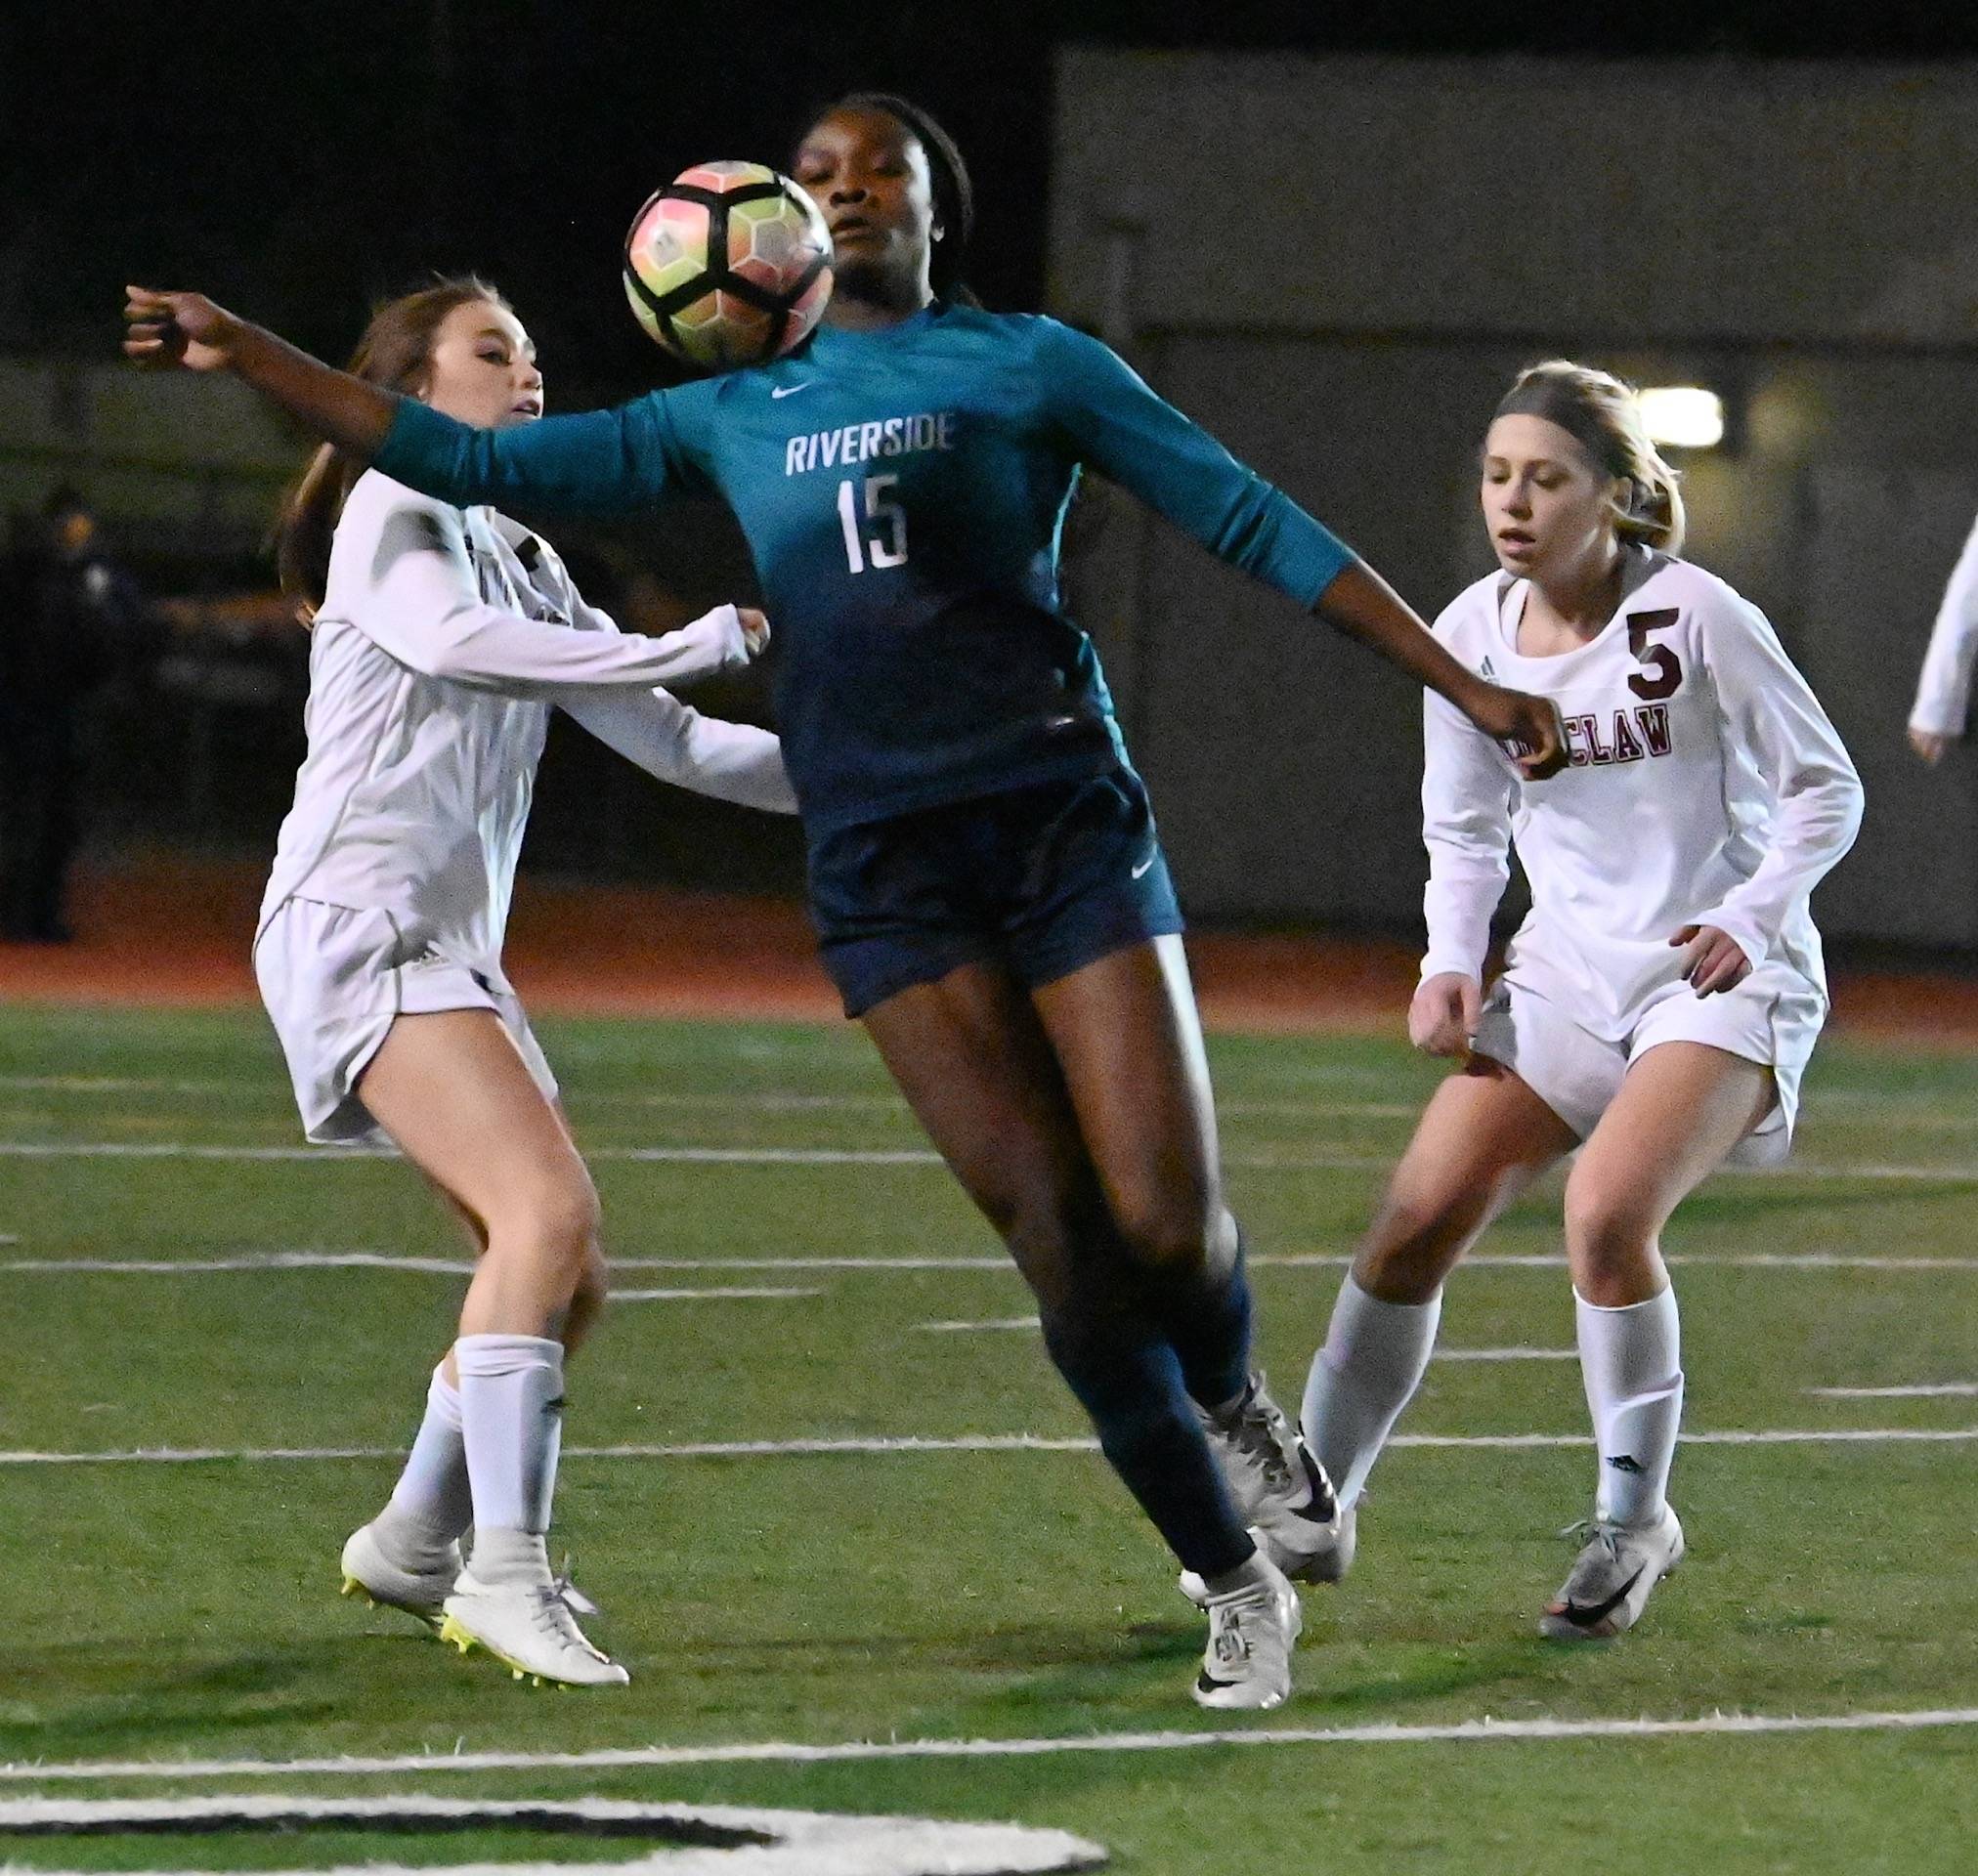 Auburn Riverside’s Stephanie Igwala battles for possession of the ball between Enumclaw defenders during 4A state playoff action Wednesday night. RACHEL CIAMPI, Auburn Reporter